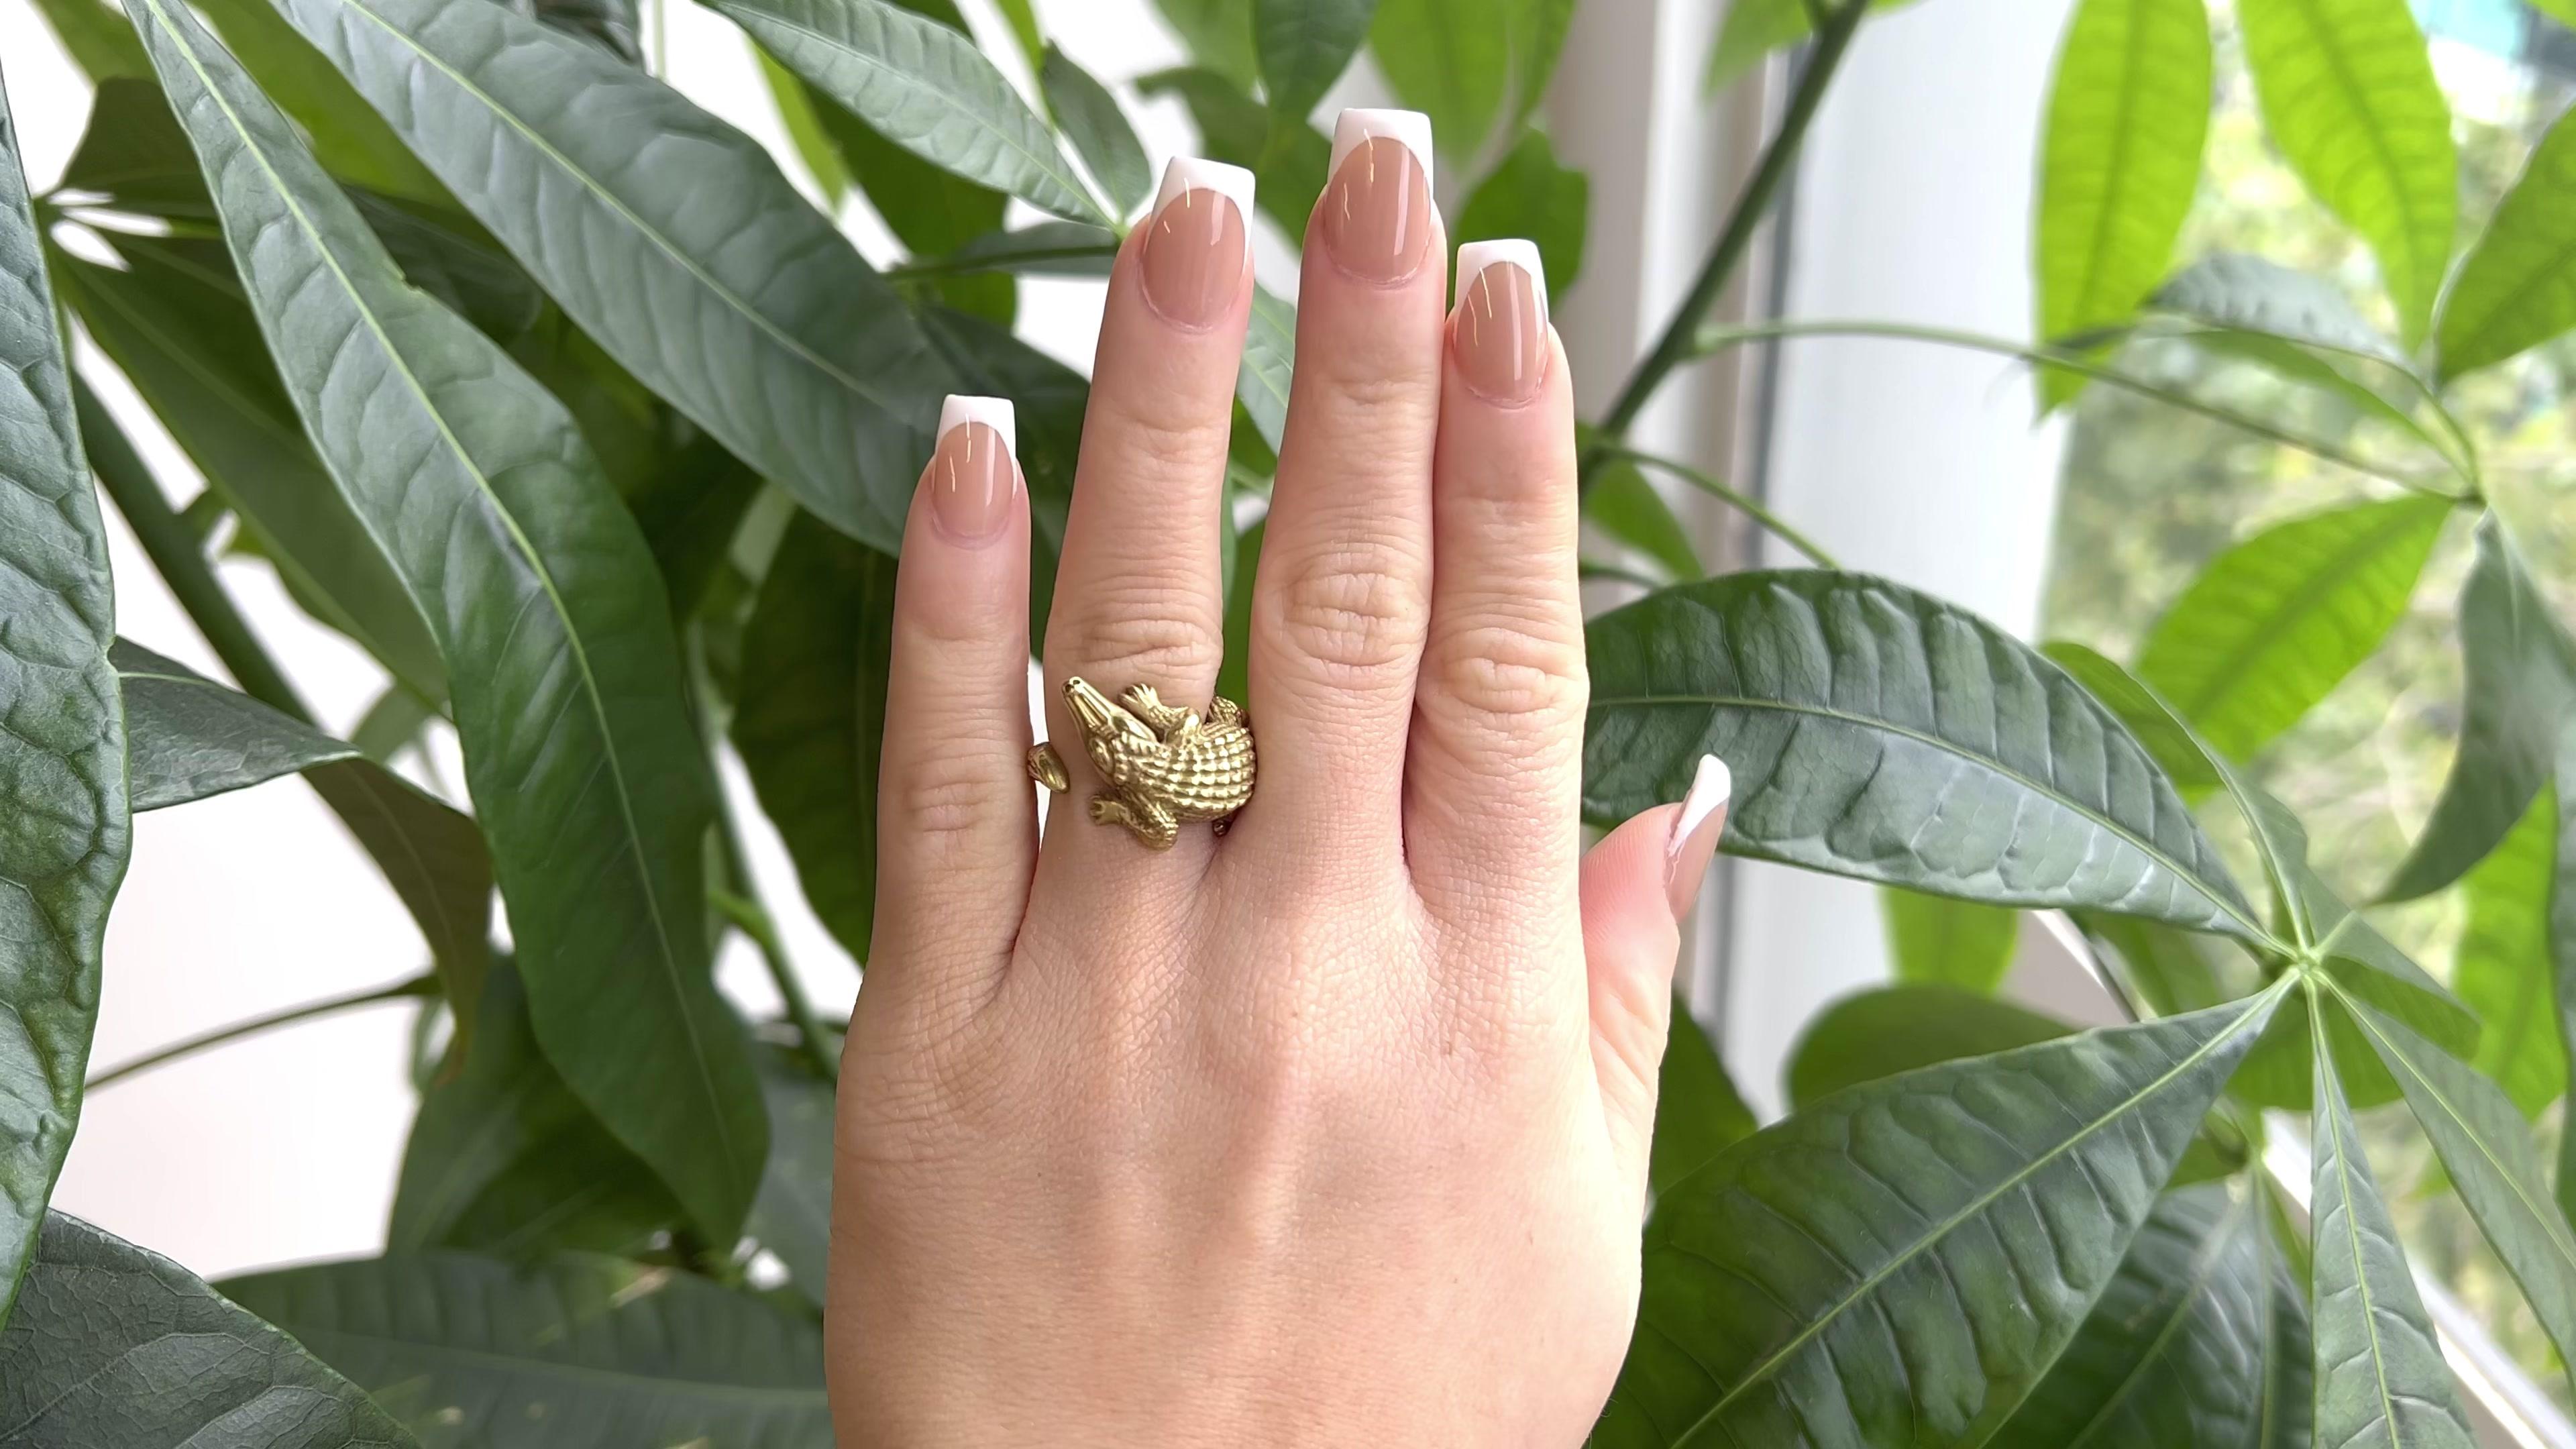 One Vintage Kieselstein Cord 18 Karat Gold Alligator Ring. Crafted in 18 karat yellow gold, signed Kieselstein and Cord. Circa 1980s. The ring is a size 6 1/2. 

About this Item: Tap into your true strength when you this Vintage Kieselstein Gold